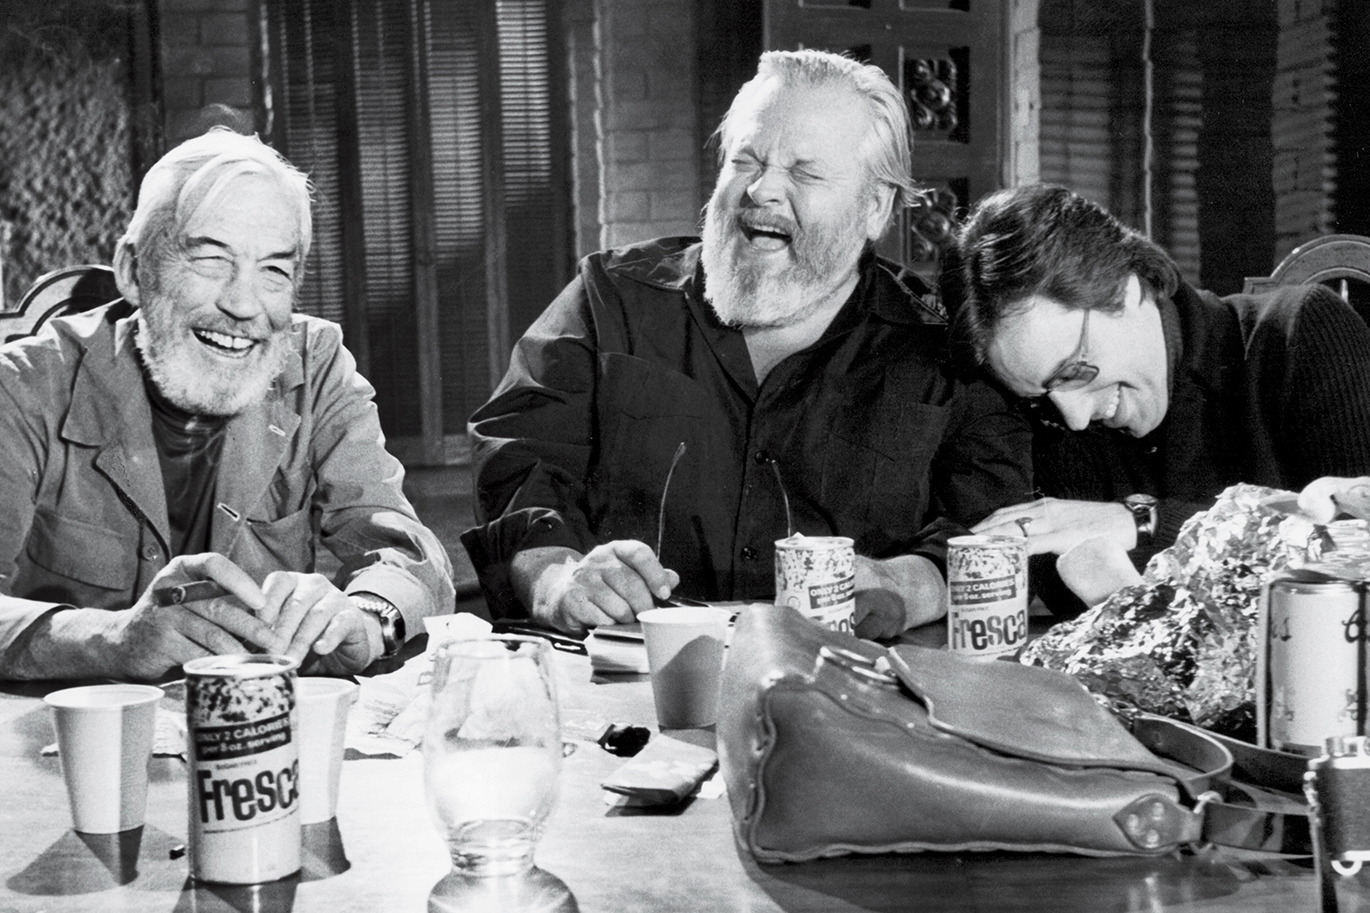 John Huston, Orson Welles and Peter Bogdanovich during filming of "The Other Side of the Wind"